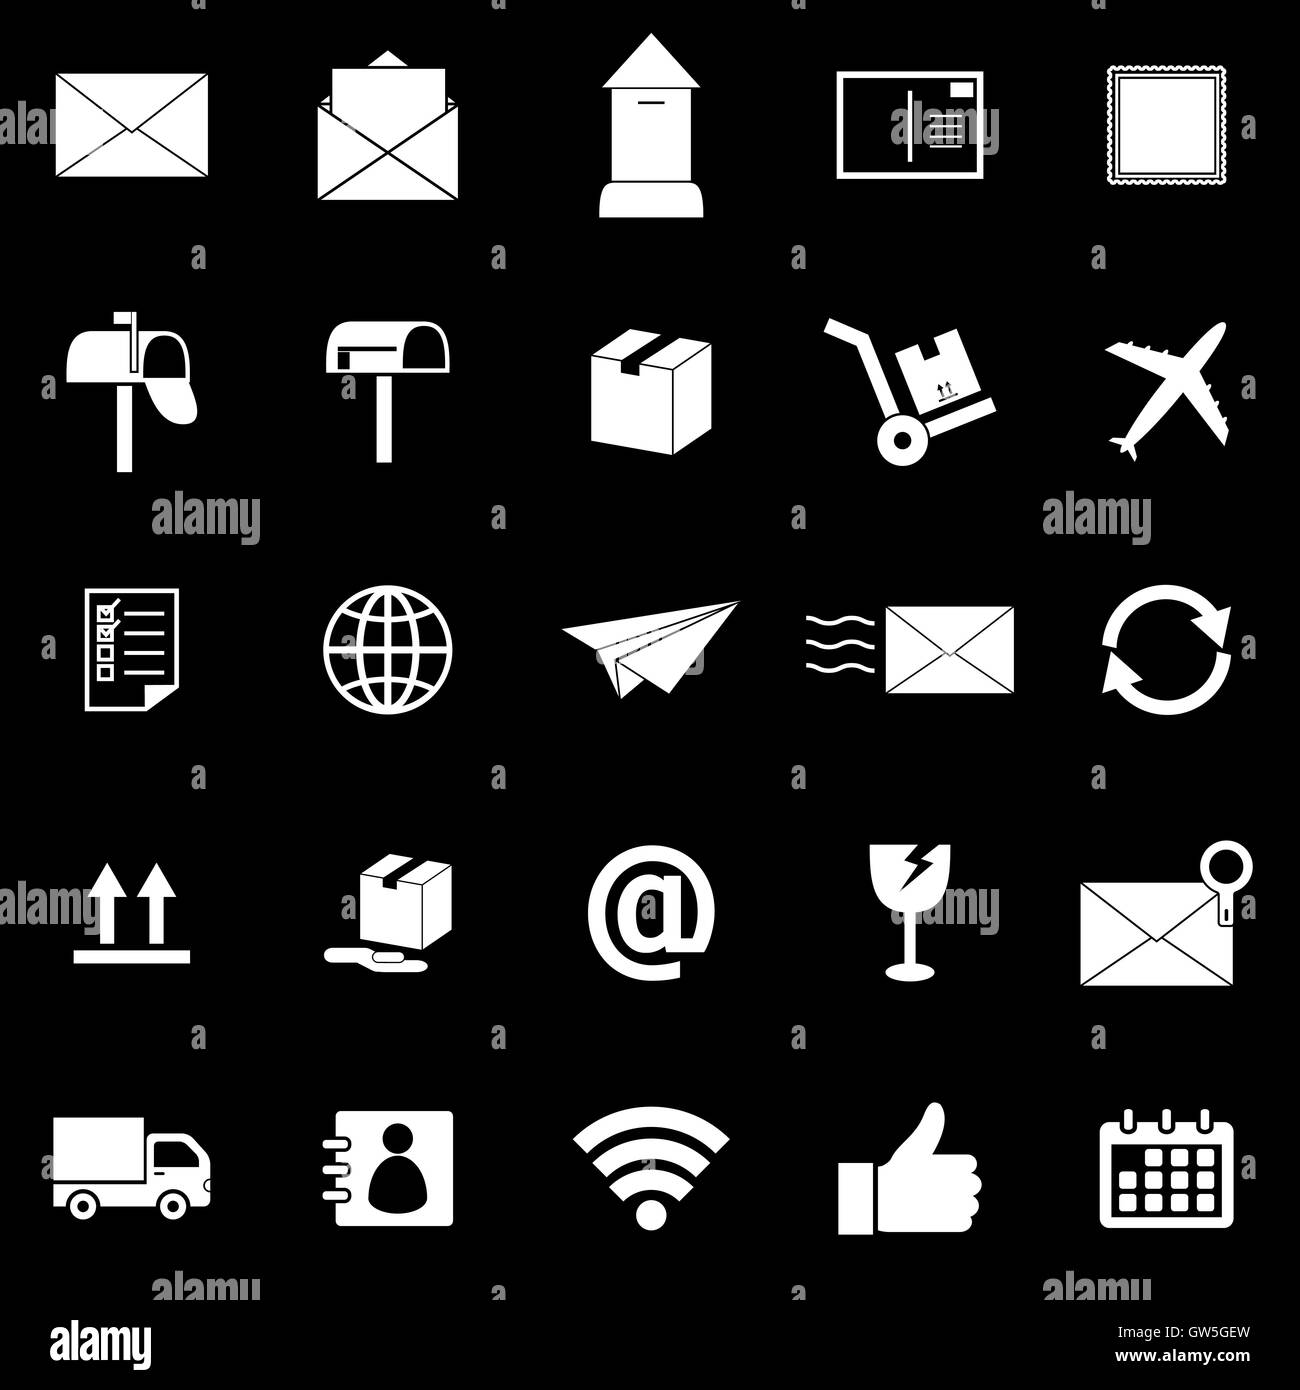 Post icons on black background, stock vector Stock Vector